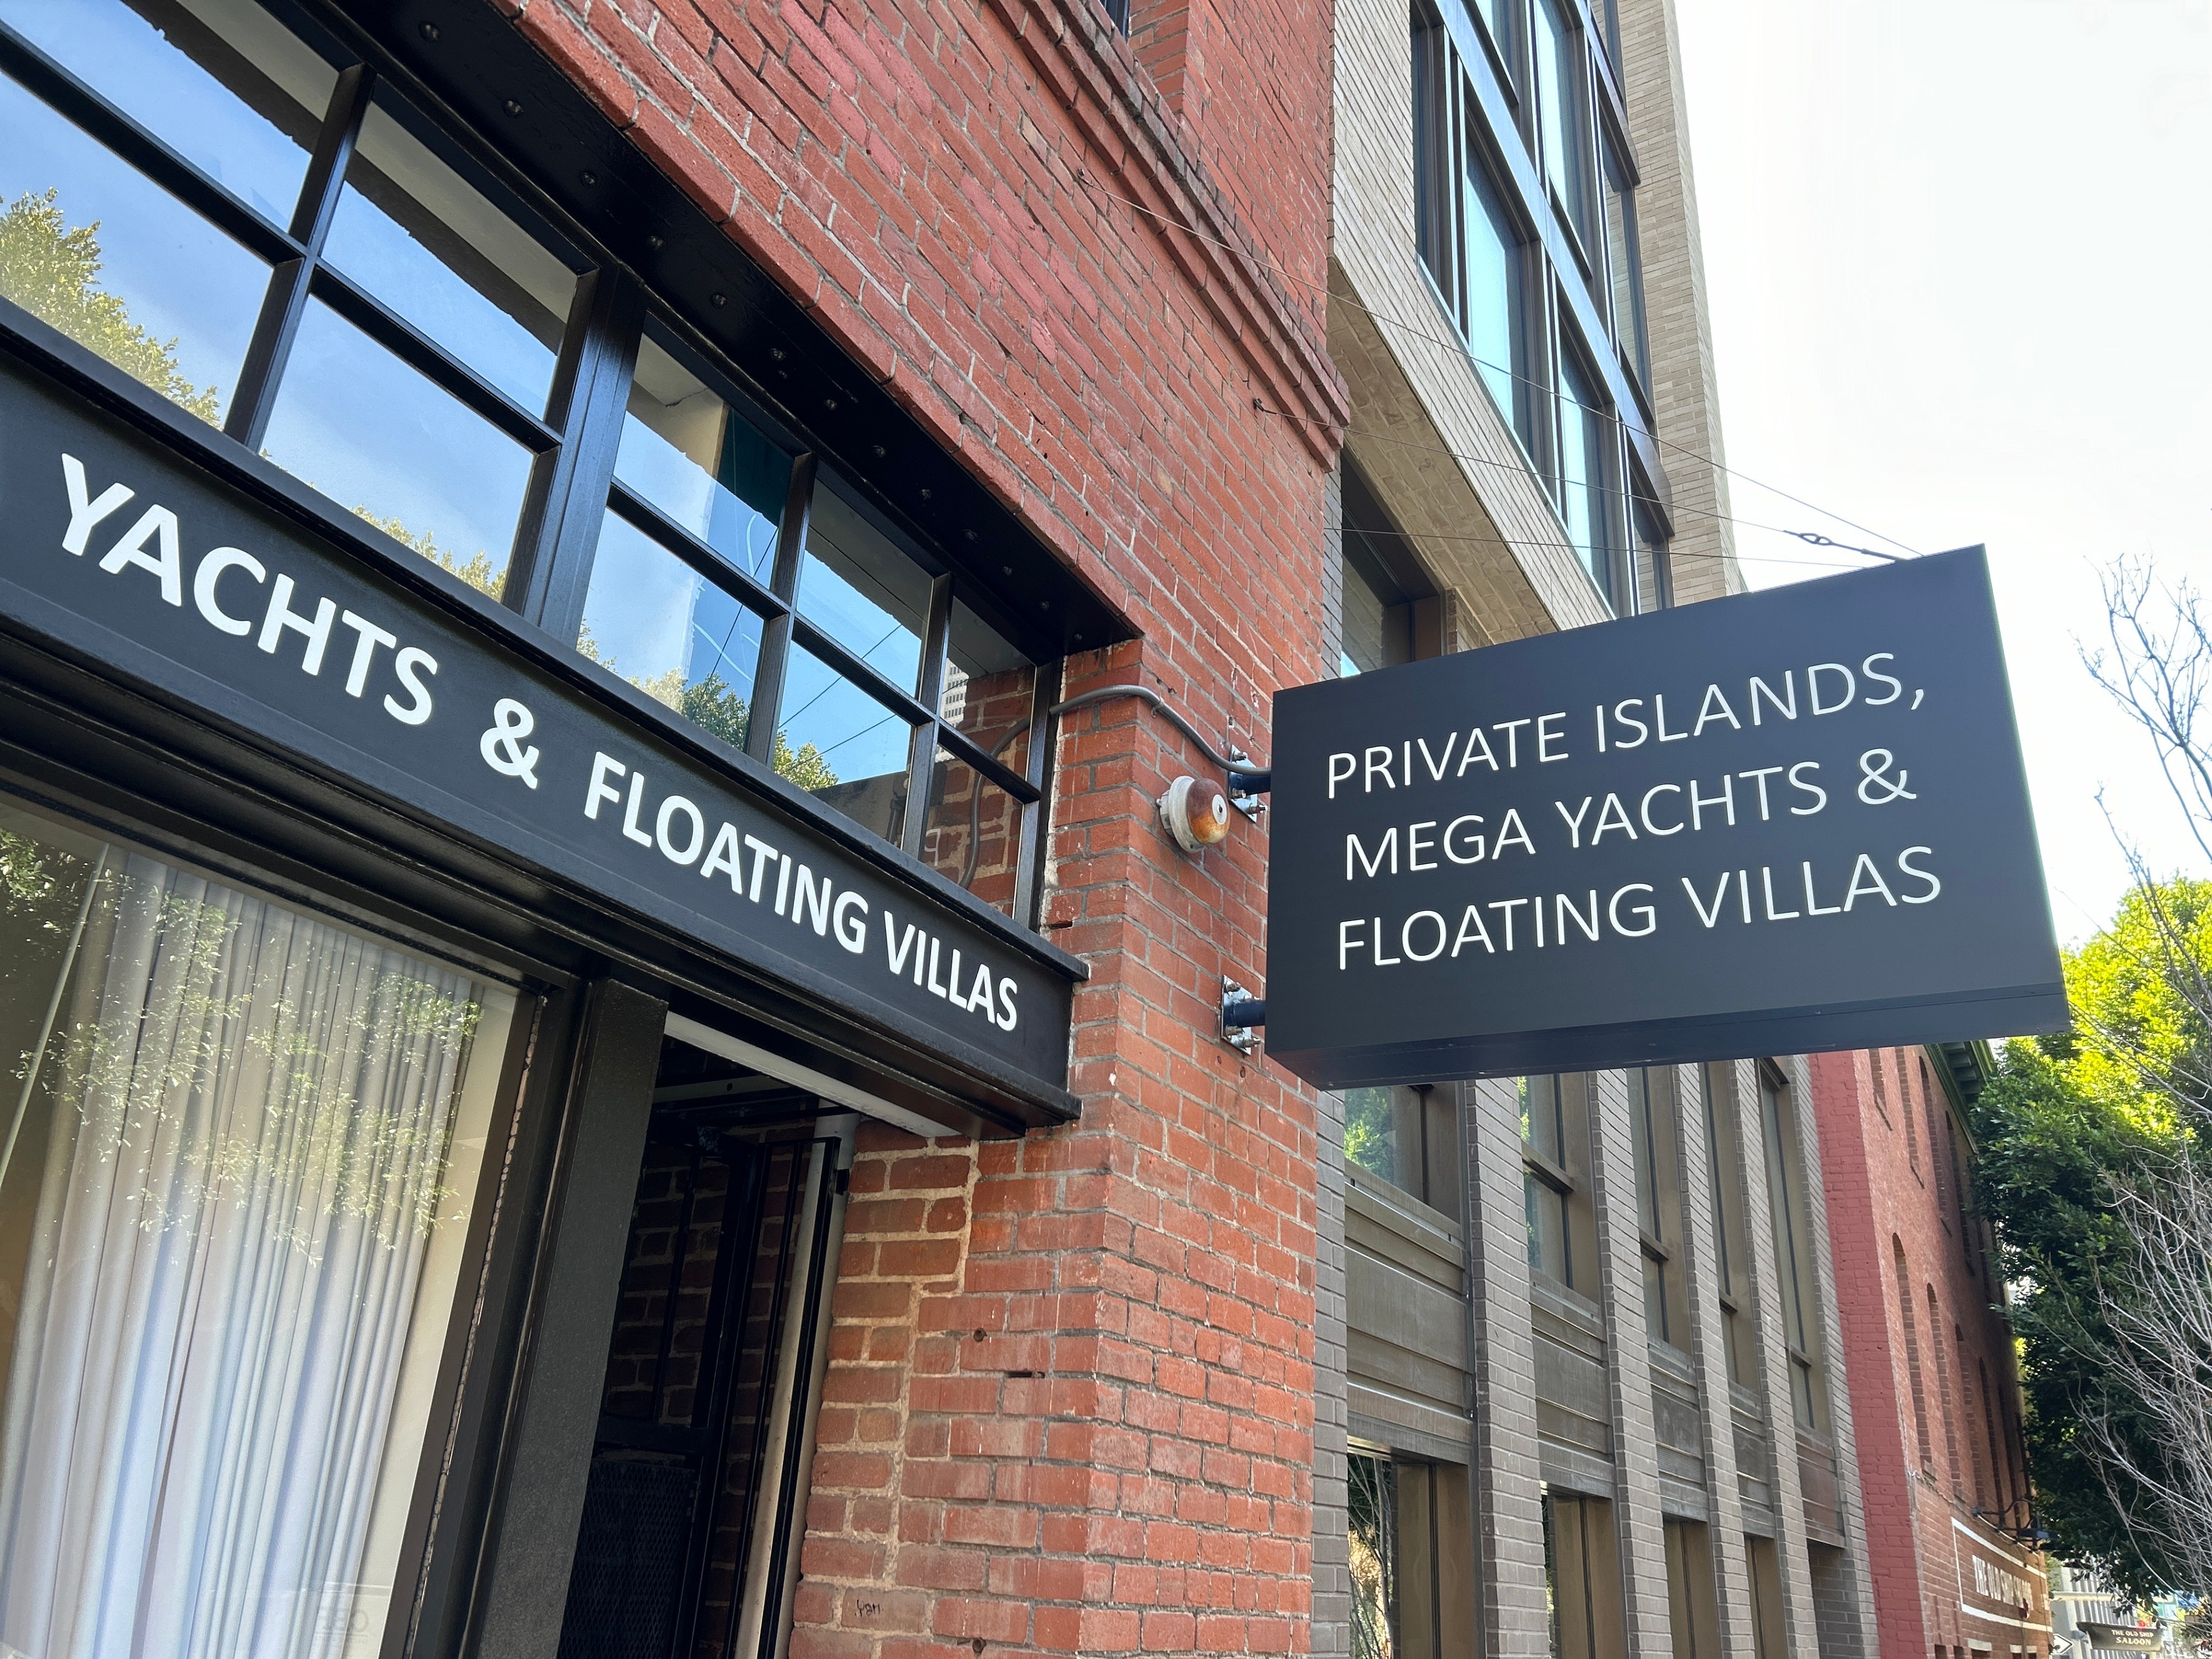 signage on a brick exterior wall advertises private islands and floating villas